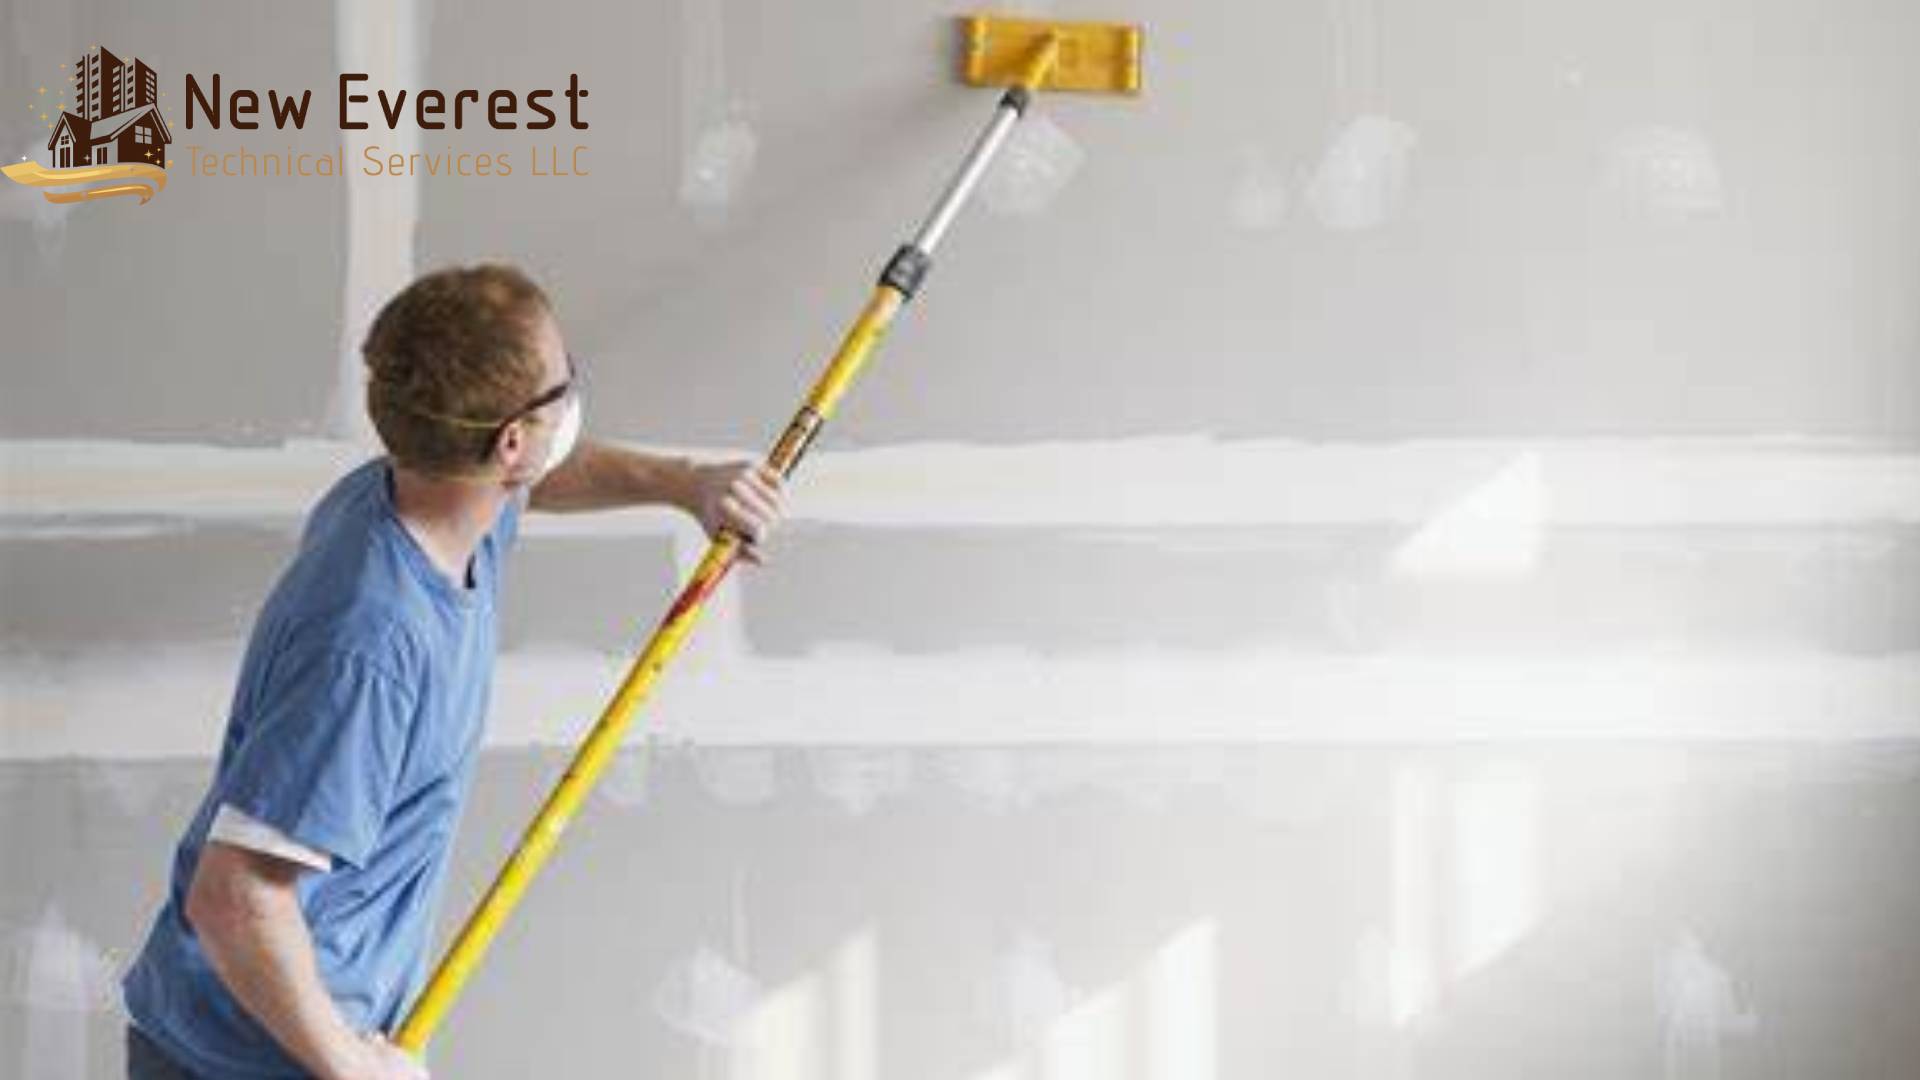 Things To Consider Before Painting Your Home